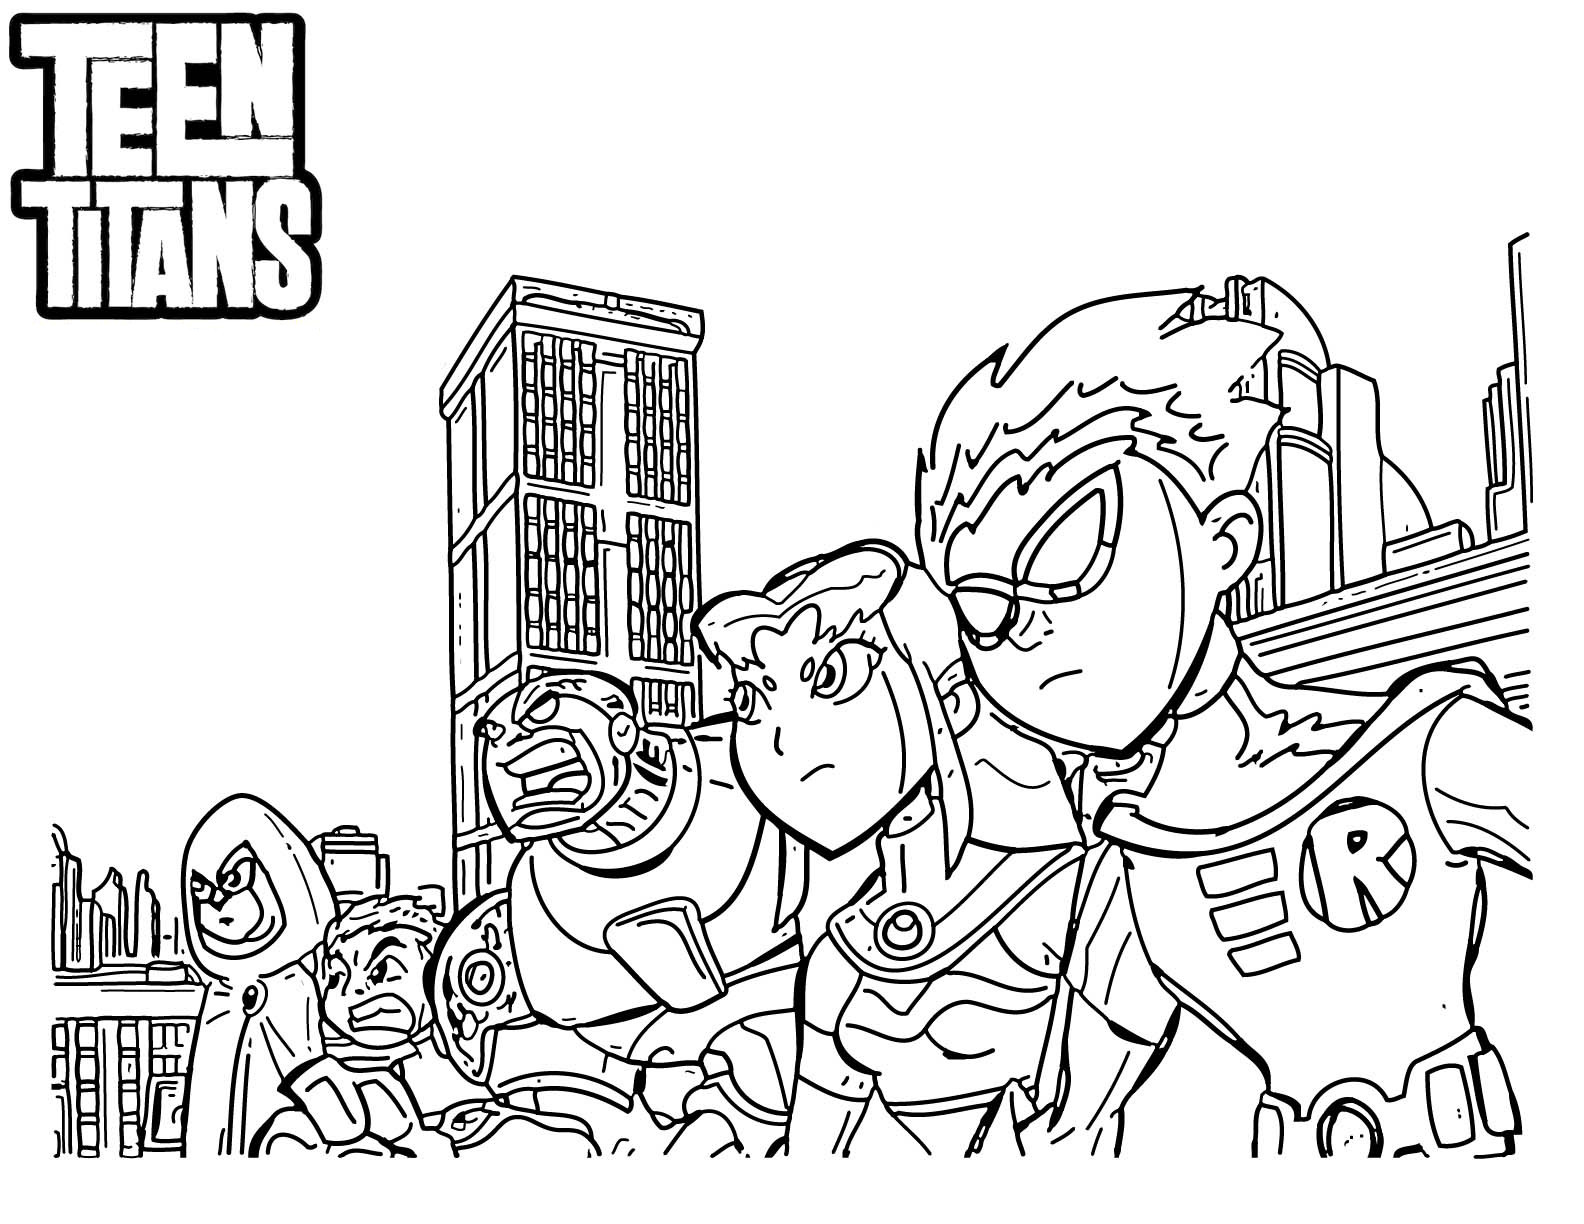 Free Coloring Sheets For Teens
 Teen Titans Coloring Pages Best Coloring Pages For Kids